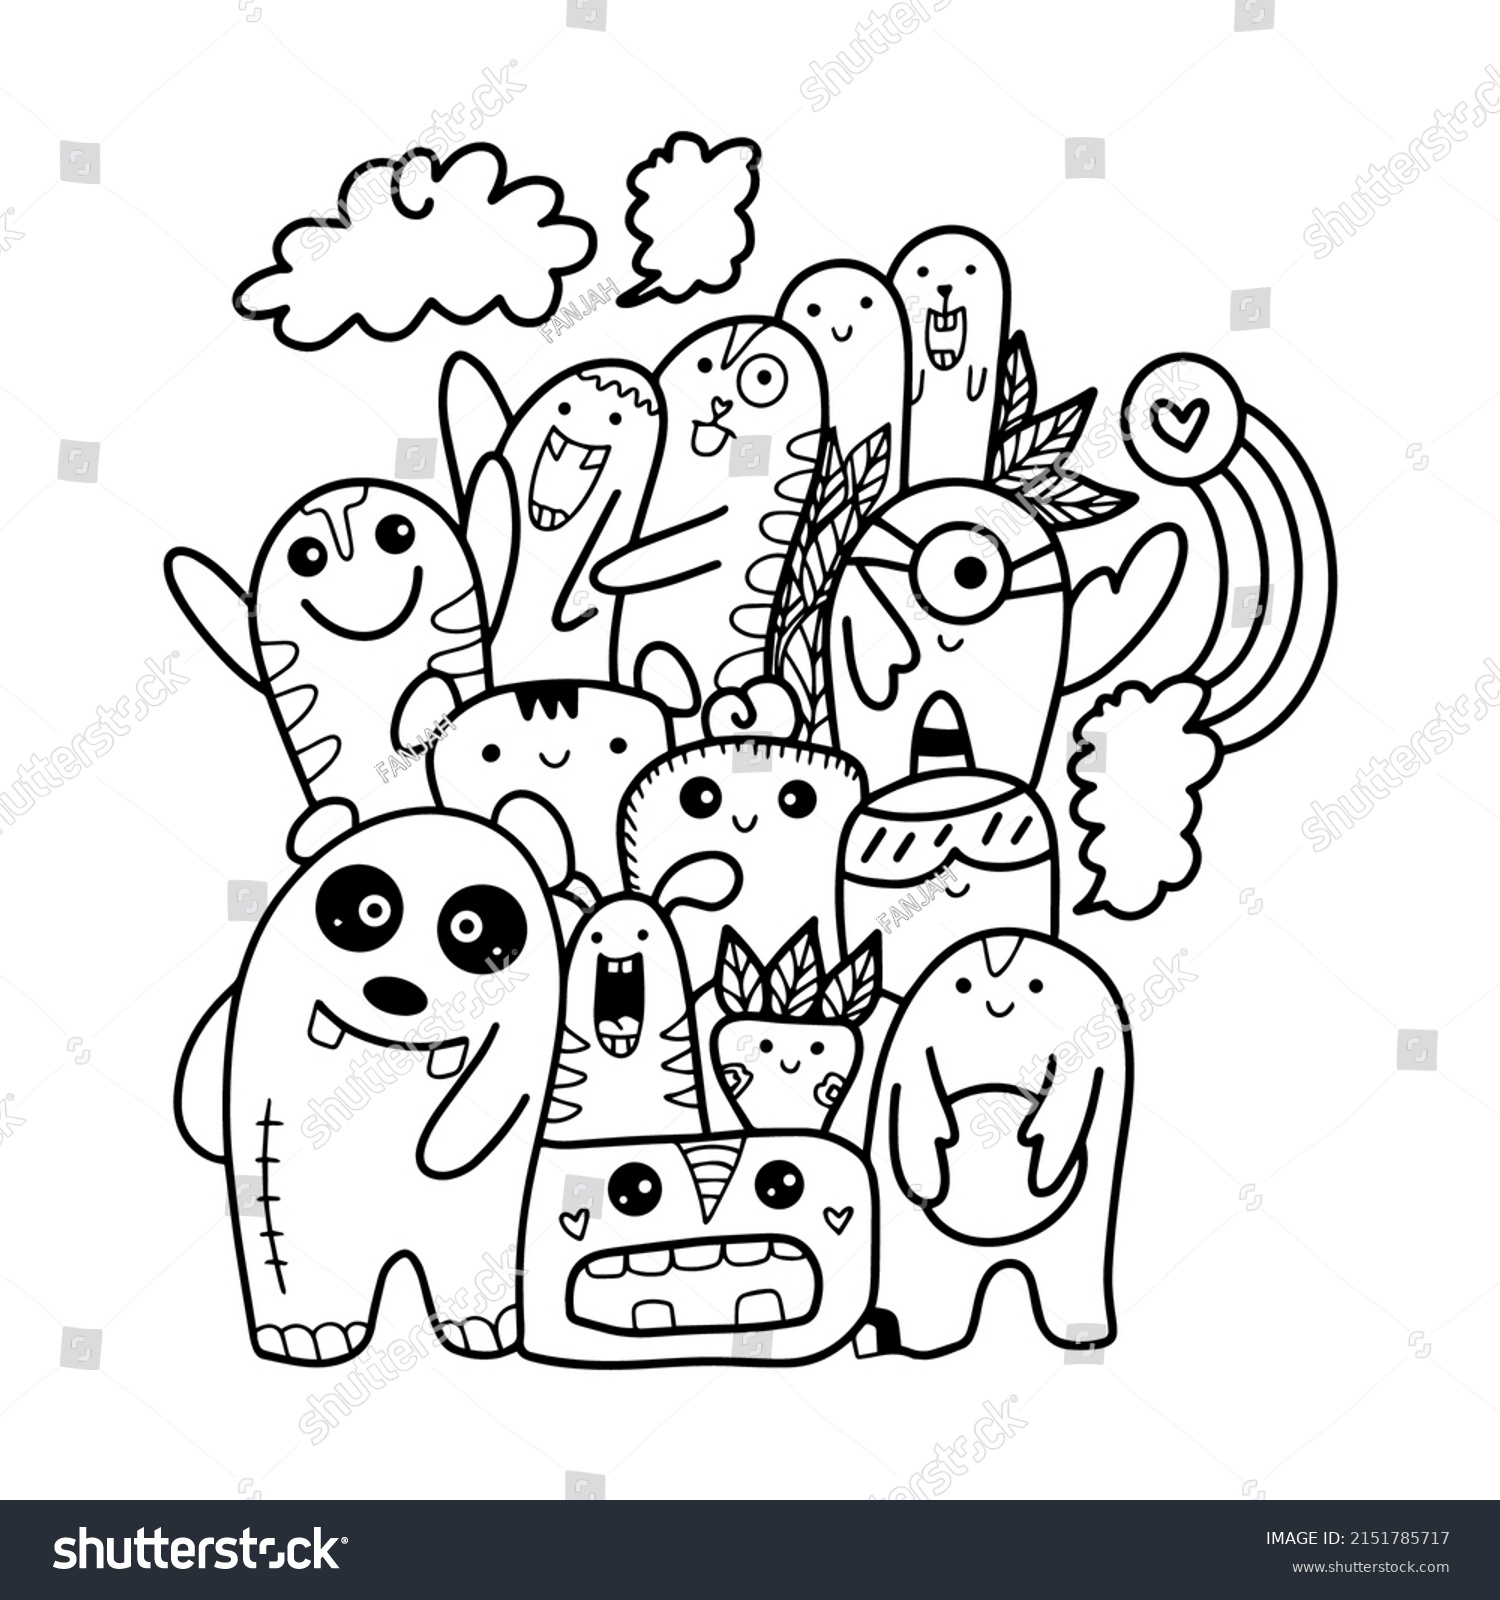 1,768 Monster society Images, Stock Photos & Vectors | Shutterstock